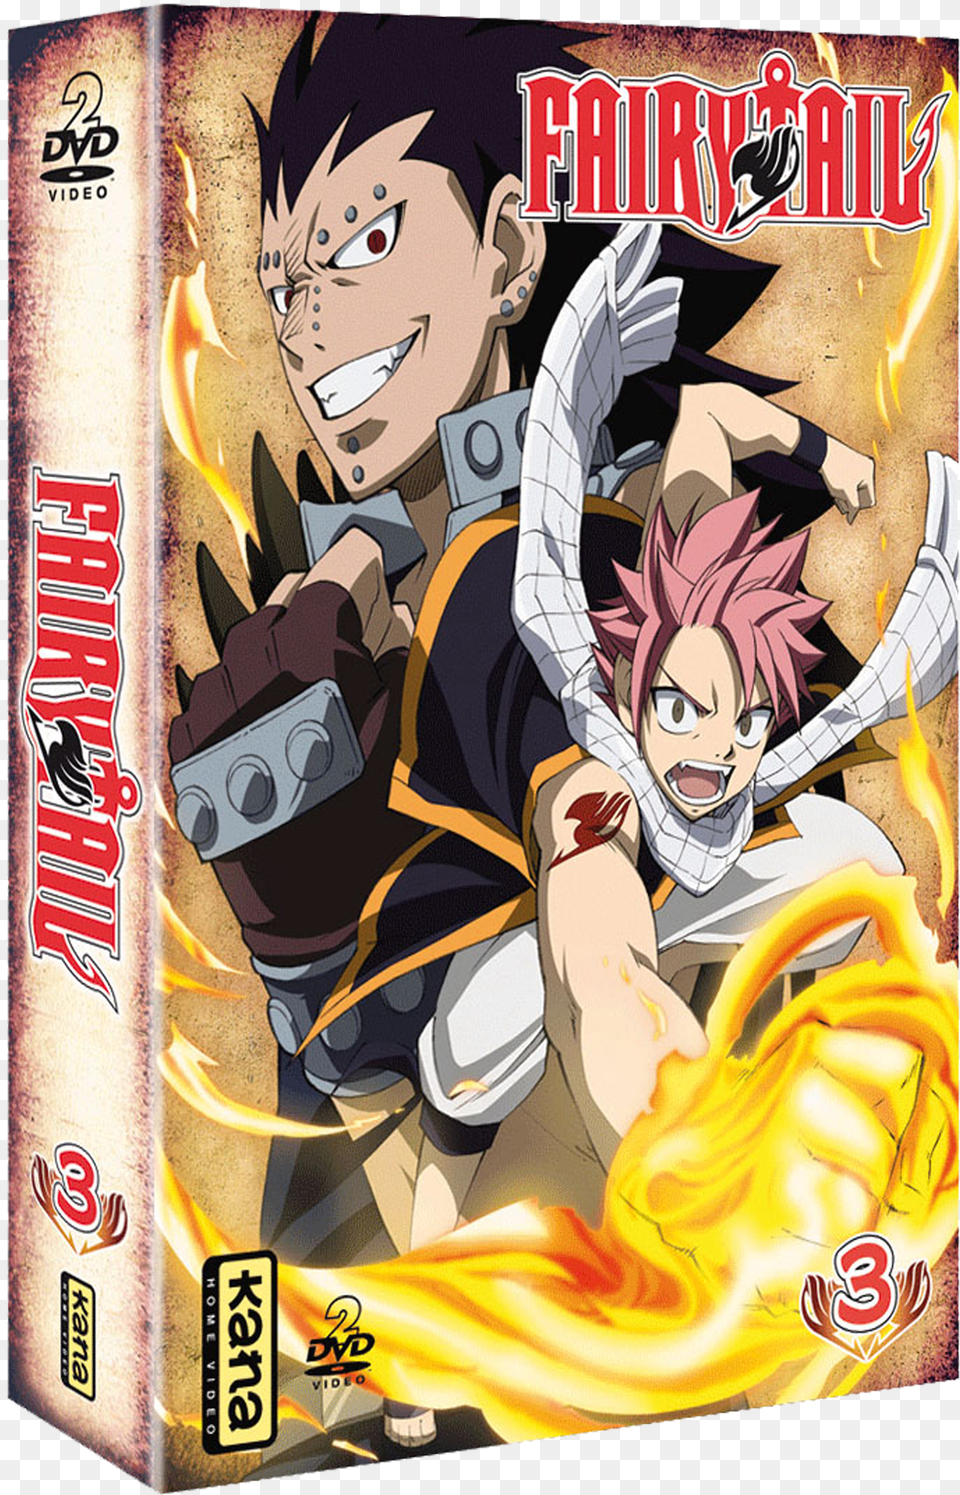 Fairy Tail Vol 3 Coffret 2 Dvd Fairy Tail Png